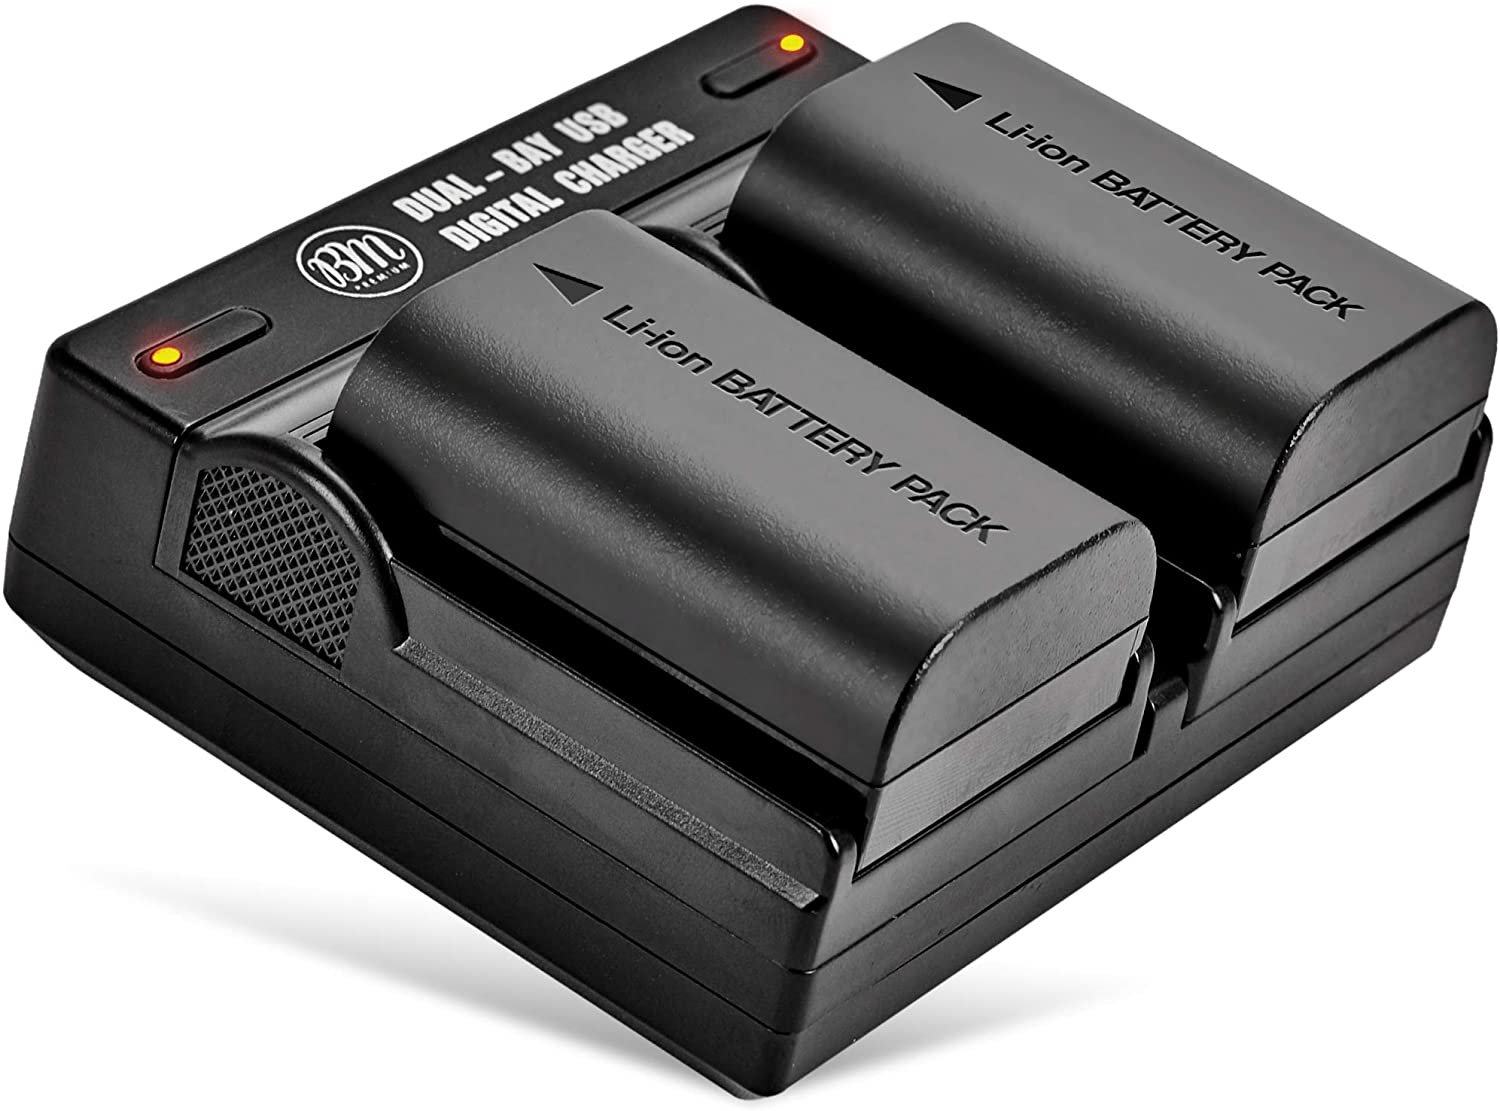 Two BM Premium LP-E6NH third party camera batteries for Canon cameras in a charger